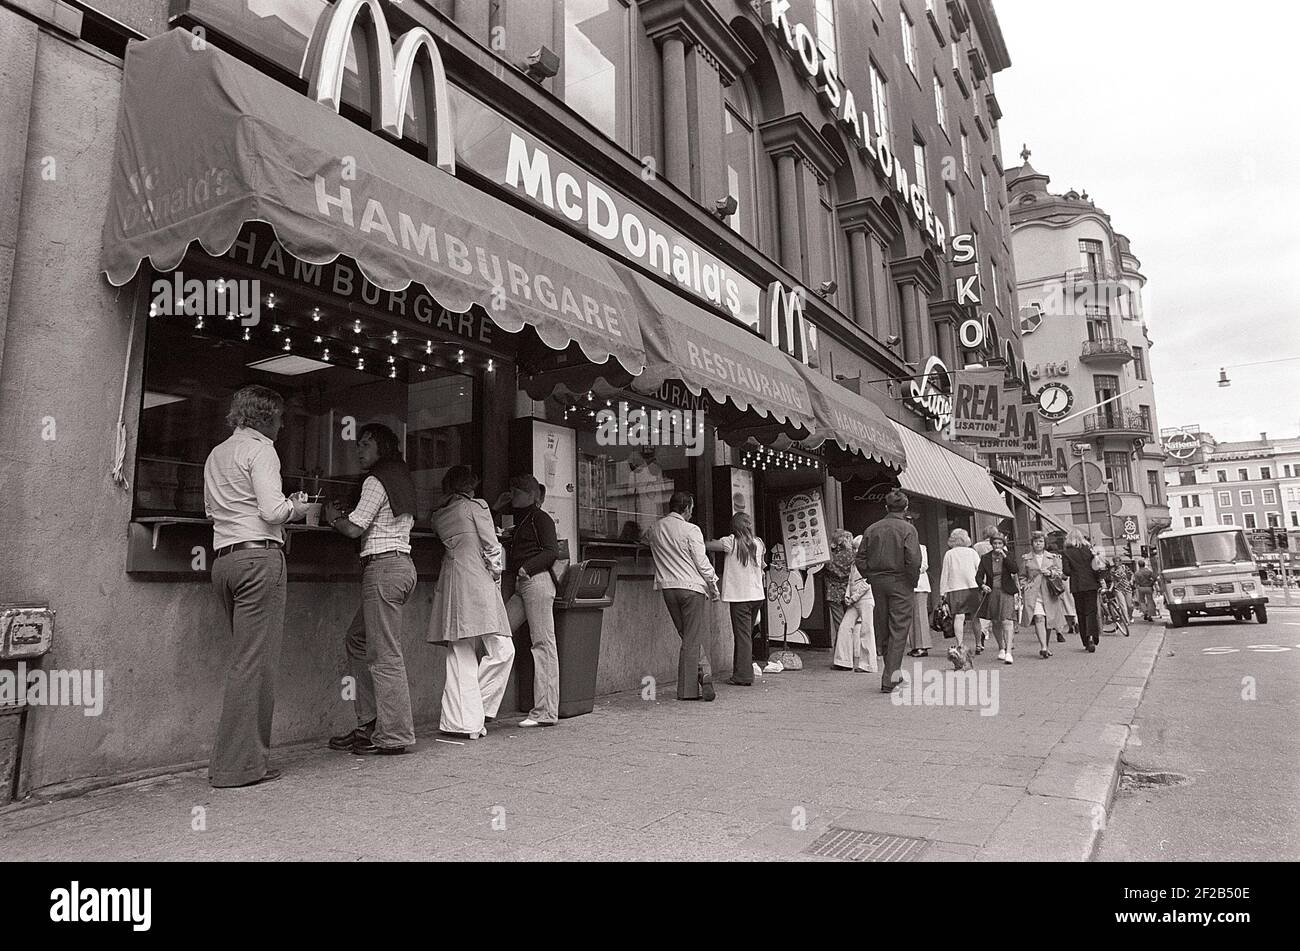 Fast food in the 1970s. Swedish businessman Paul Lederhausen obtains the  swedish rights to fast-food chain McDonalds and on october 27 1973 opens  the very first McDonalds restaurant i Sweden on Kungsgatan